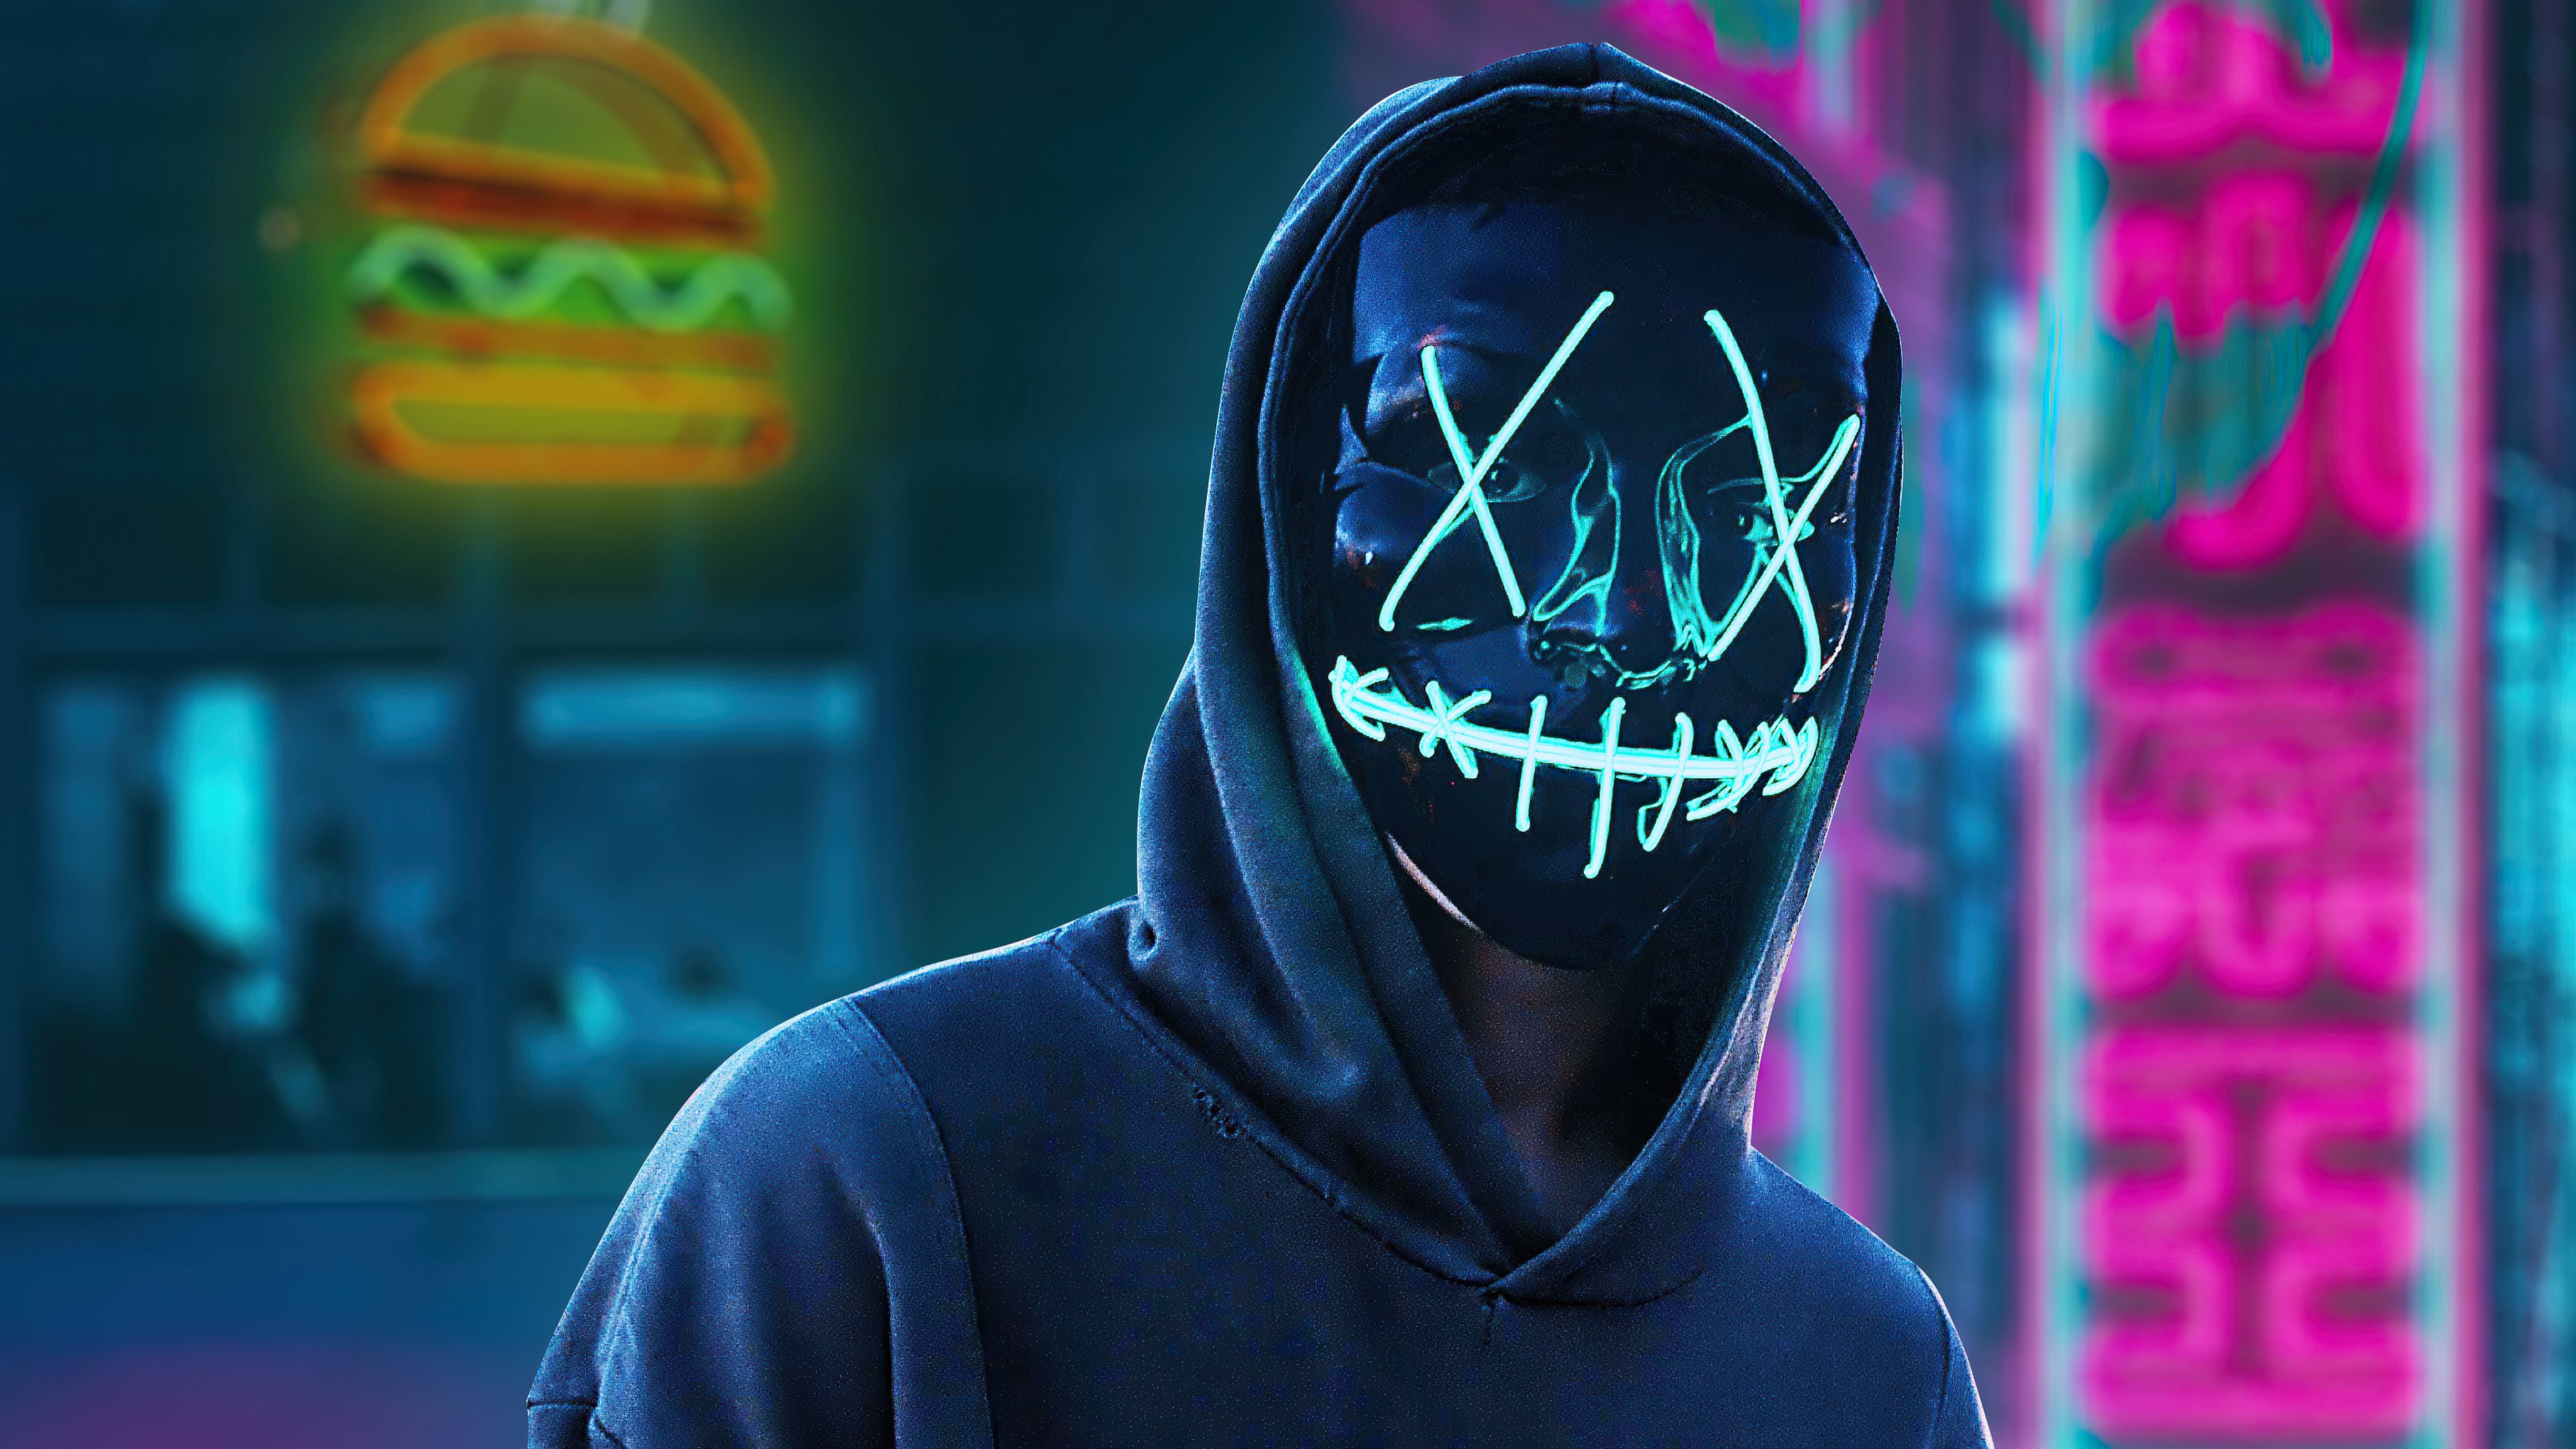 Black Mask Hoodie Boy In City 4k, HD Artist, 4k Wallpaper, Image, Background, Photo and Picture